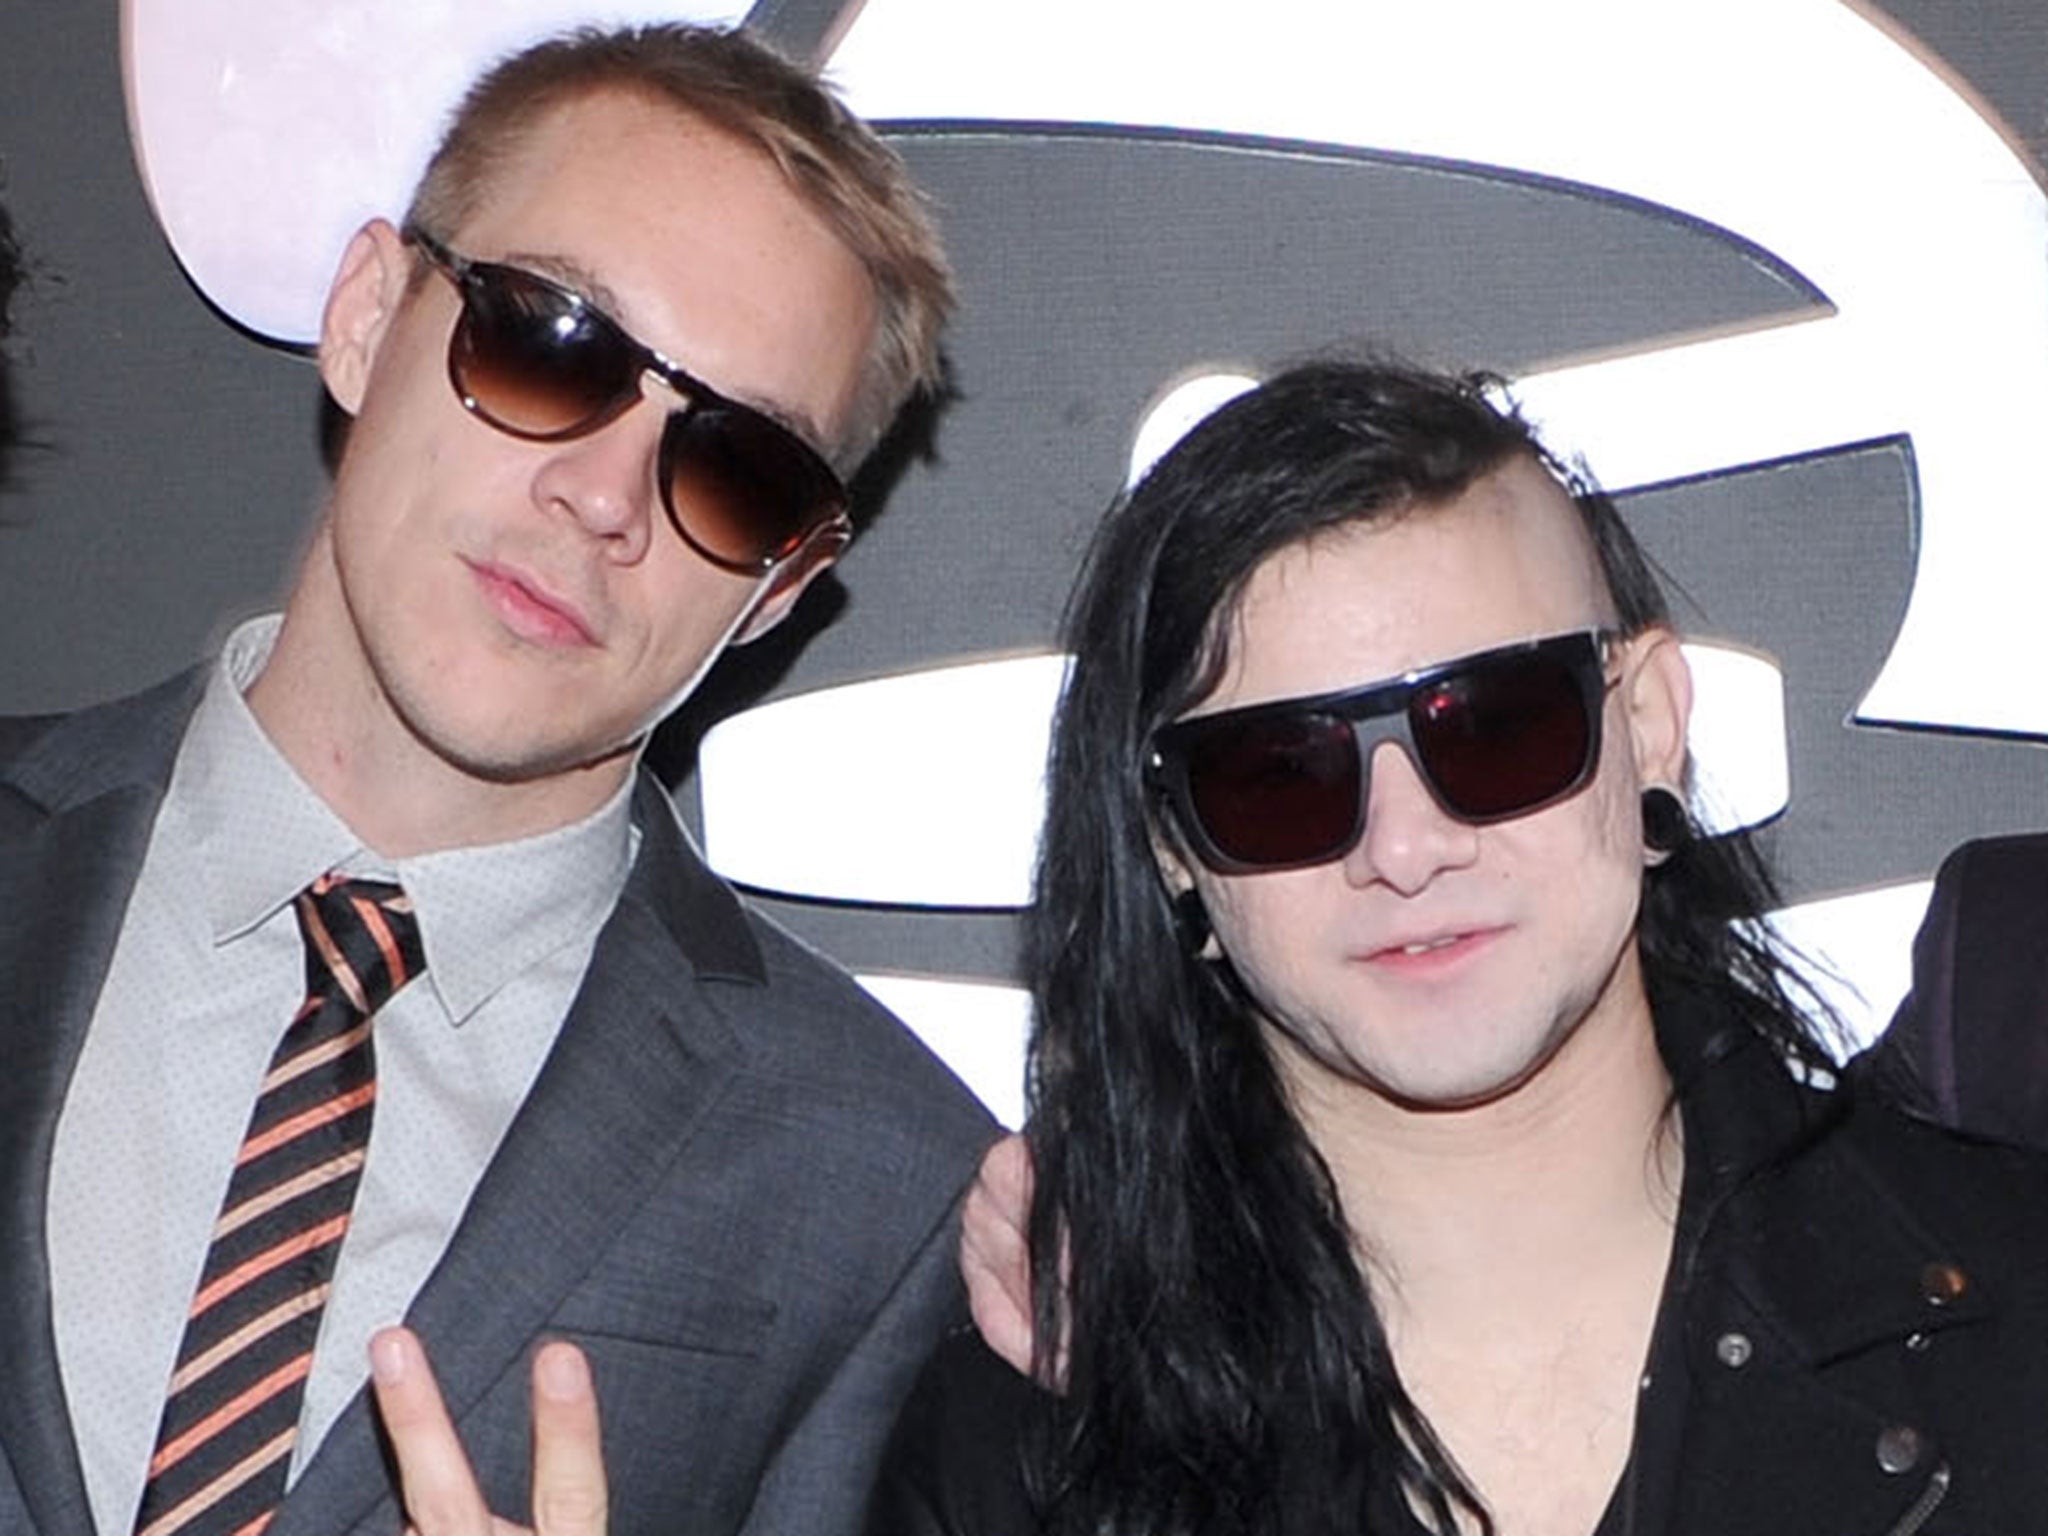 Diplo and Skrillex released an album during their planned 24-hour DJ set